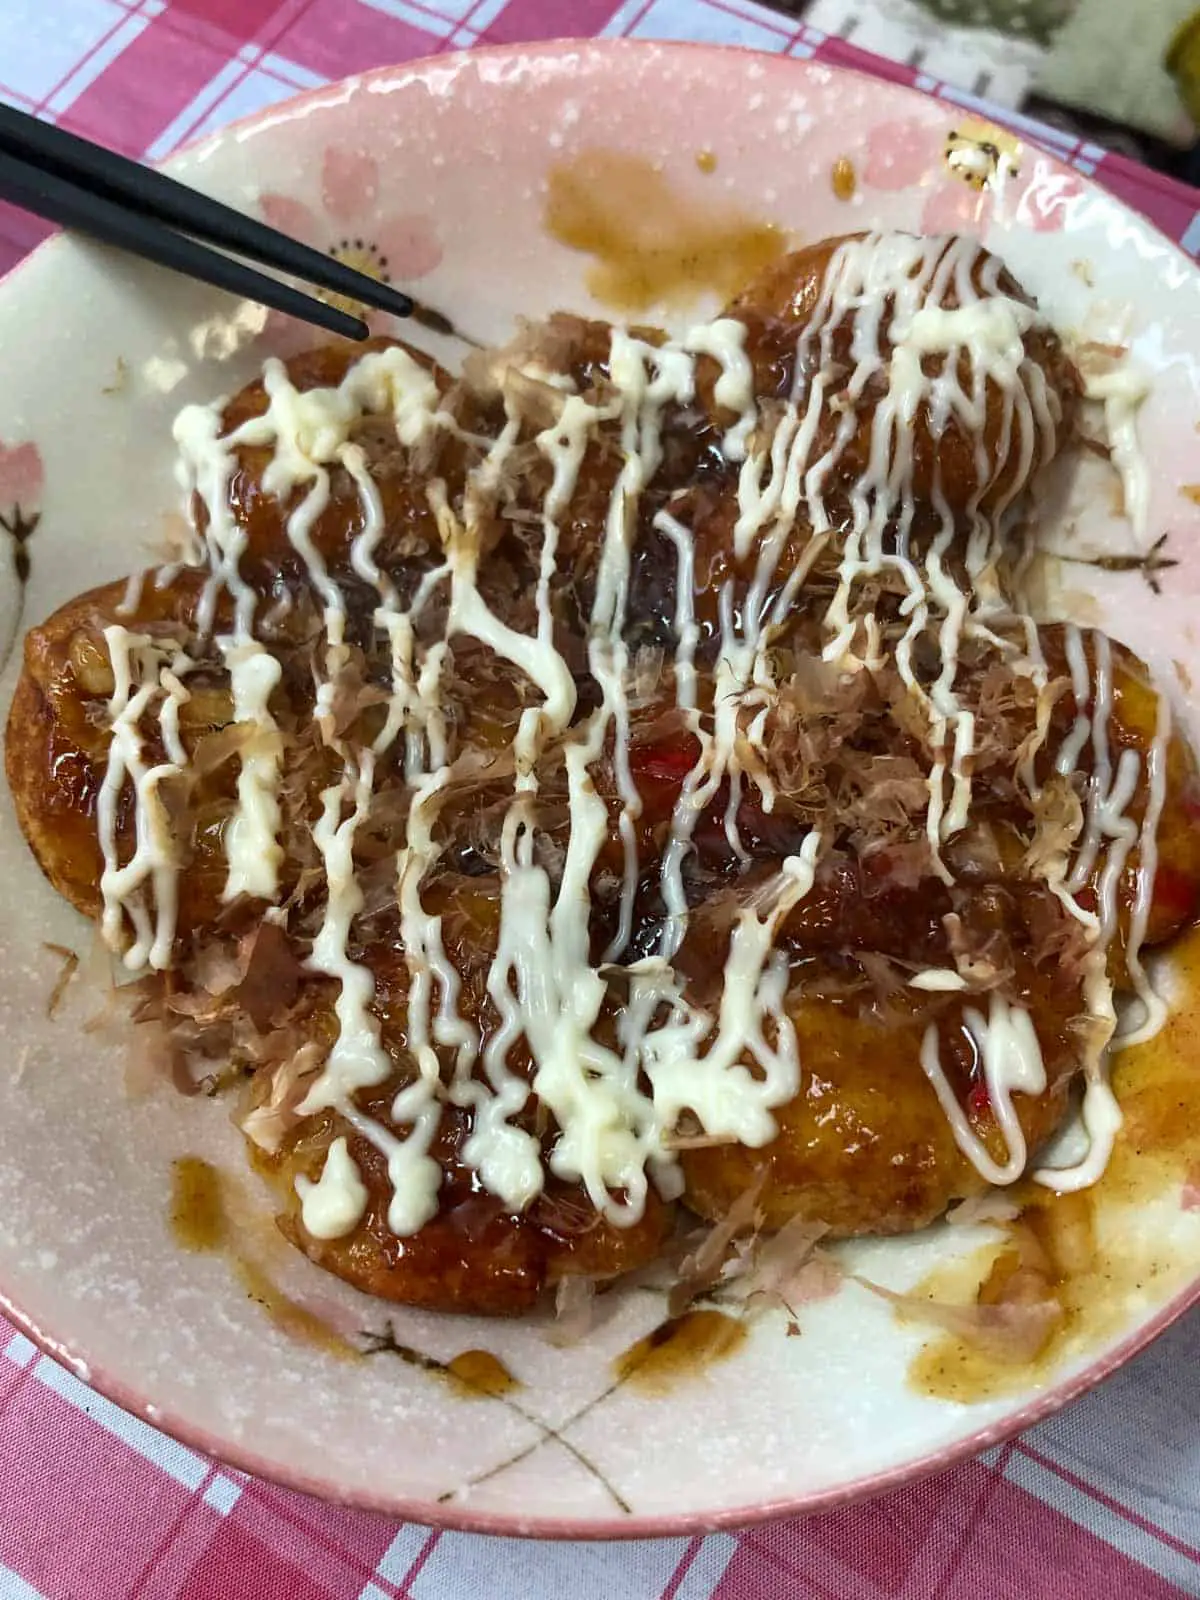 A plate full of takoyaki which is a ball shaped food filled with octopus and topped with drizzled mayonnaise and bonito flakes.  There is a pair of chopsticks resting on the side. 